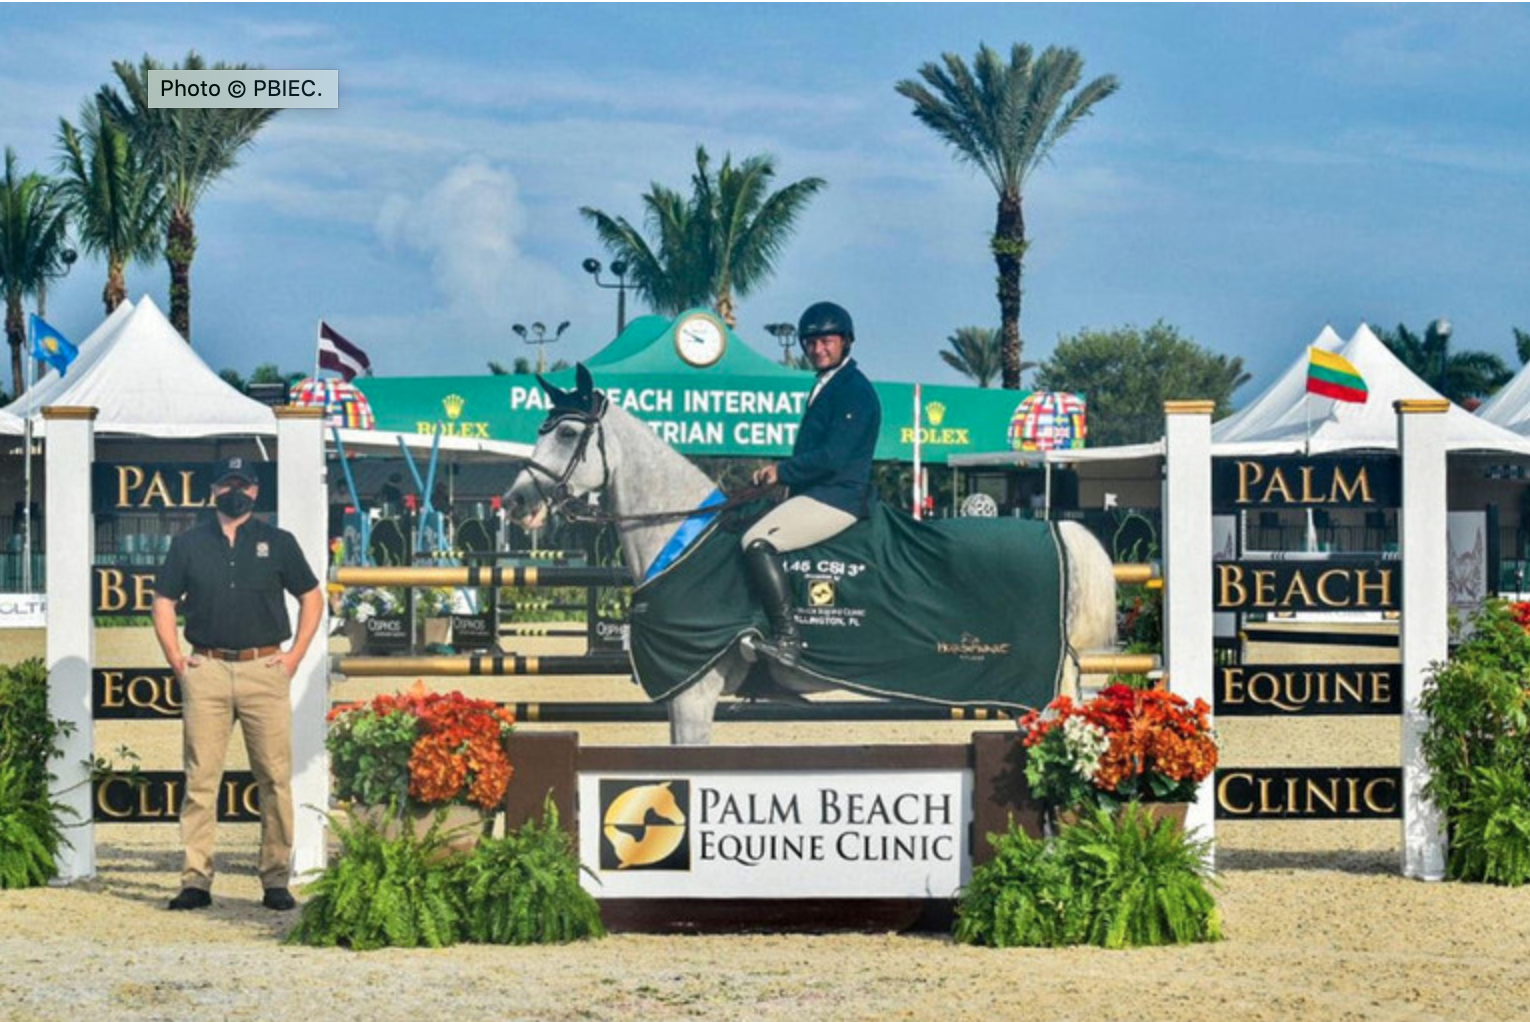 Alberto Michan and Loribri win $6,000 Palm Beach Equine Clinic 1.45m CSI3* on opening day of international competition